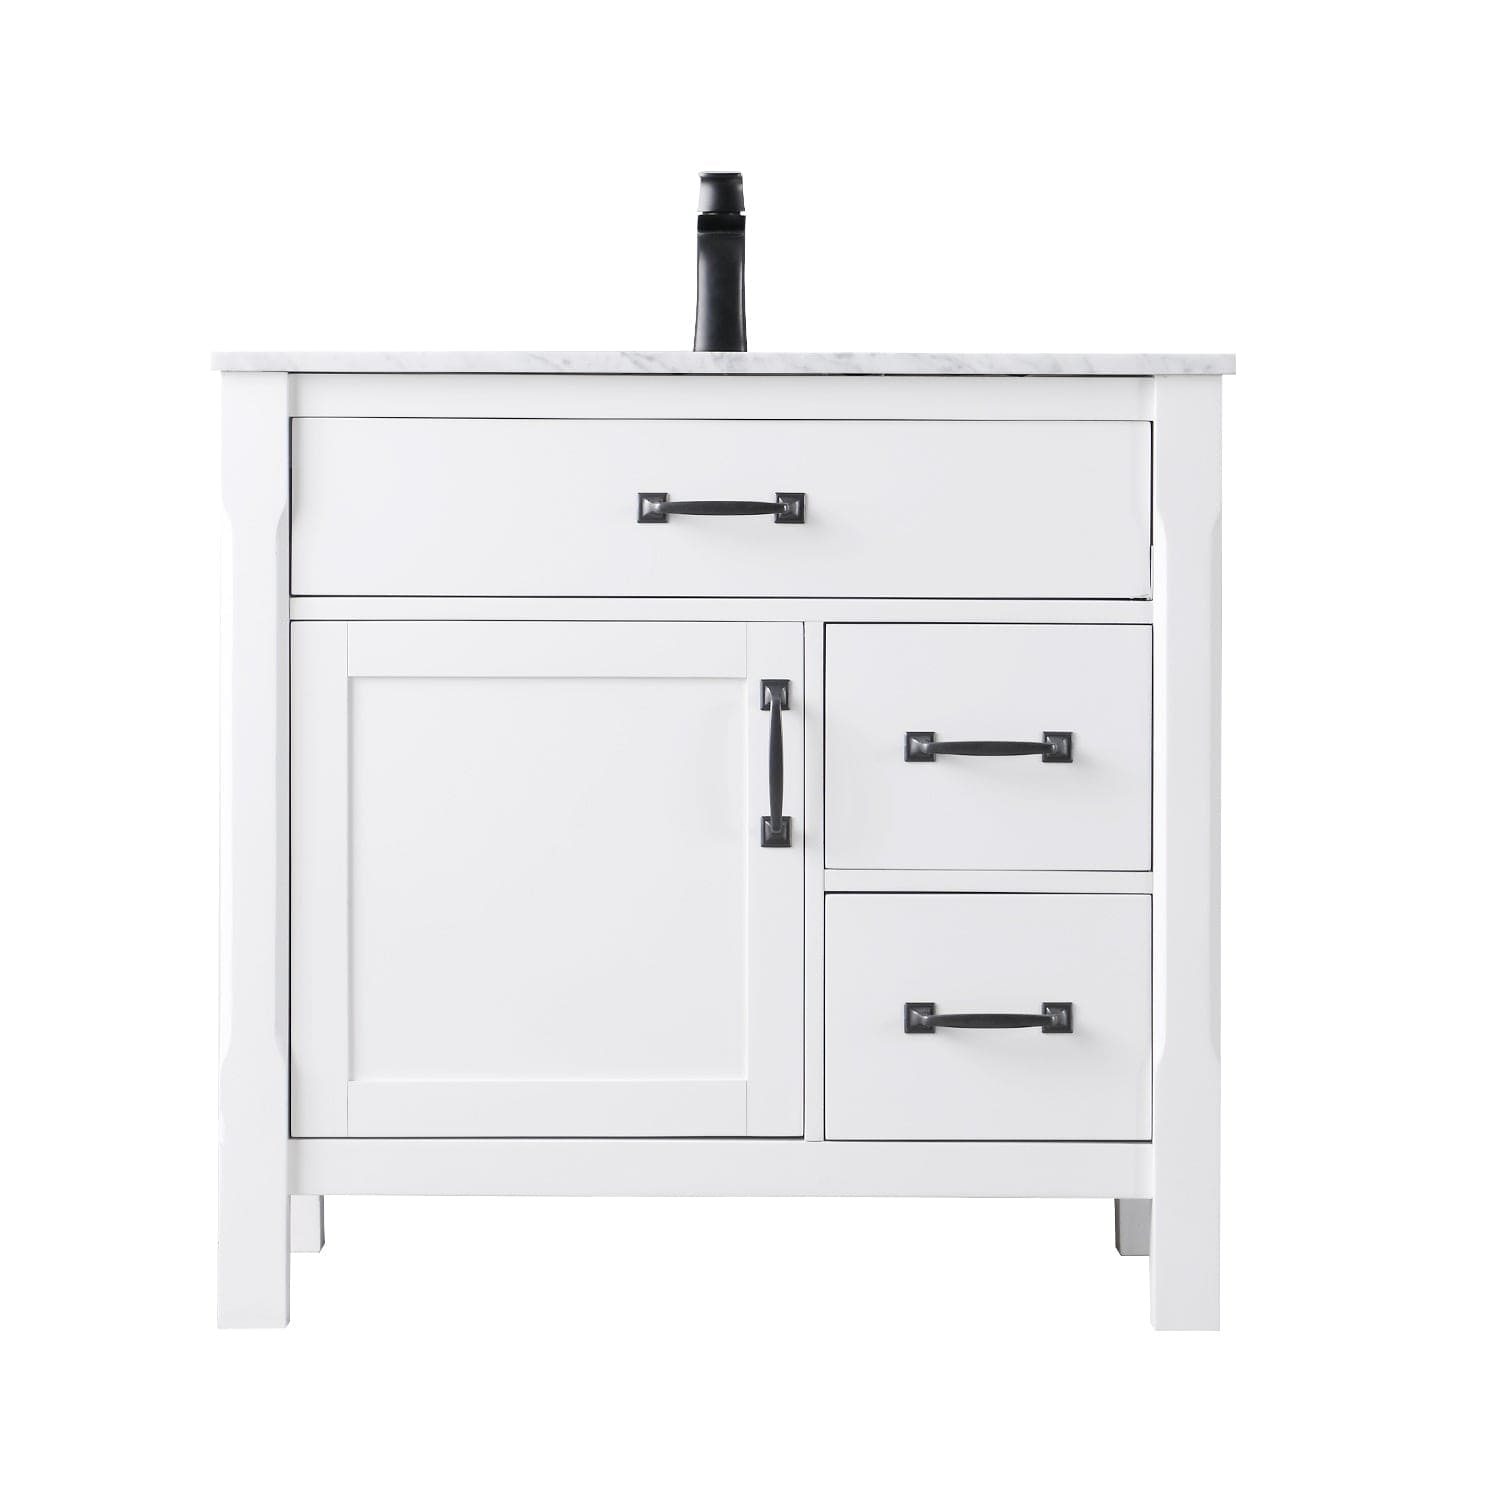 Altair Maribella 36" Single Bathroom Vanity Set in White and Carrara White Marble Countertop without Mirror 535036-WH-CA-NM - Molaix631112970303Vanity535036-WH-CA-NM